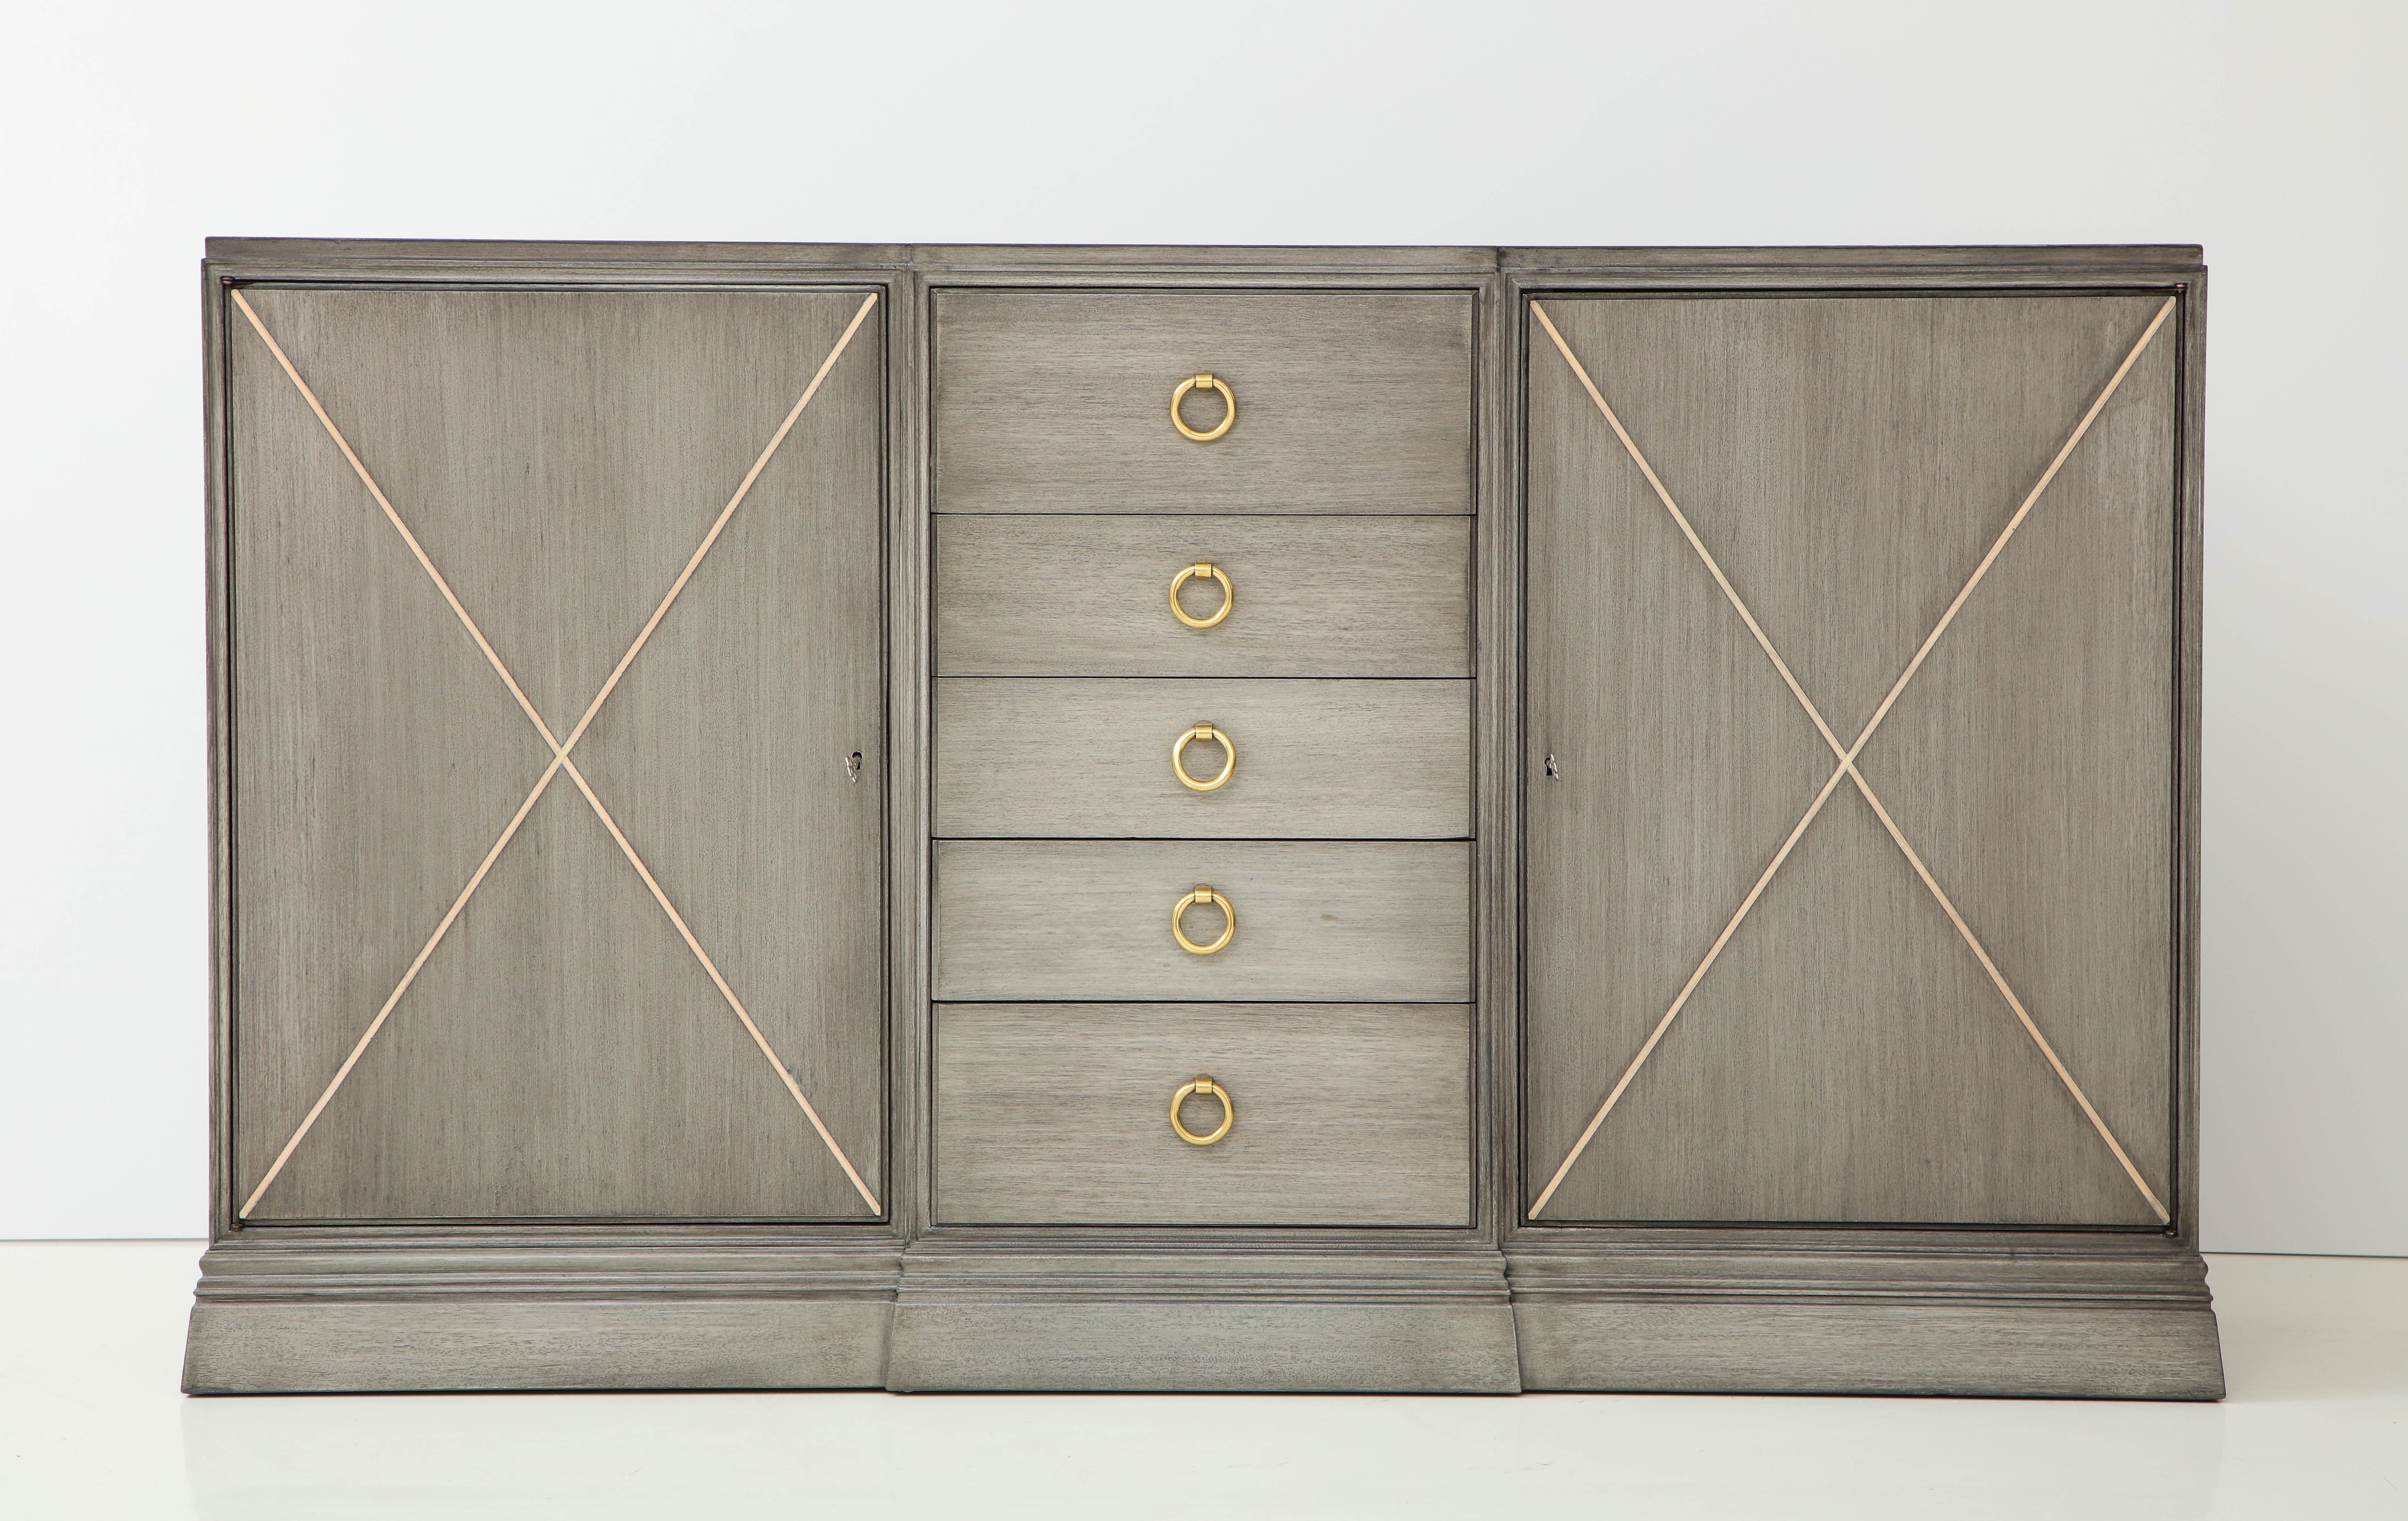 Stunning newly refinished Tommi  Parzinger for Charak cabinet.
The cabinet has been beautifully refinished in a soft gray tone with polished brass pulls.
The interior sides of the cabinet have a satin black finish.